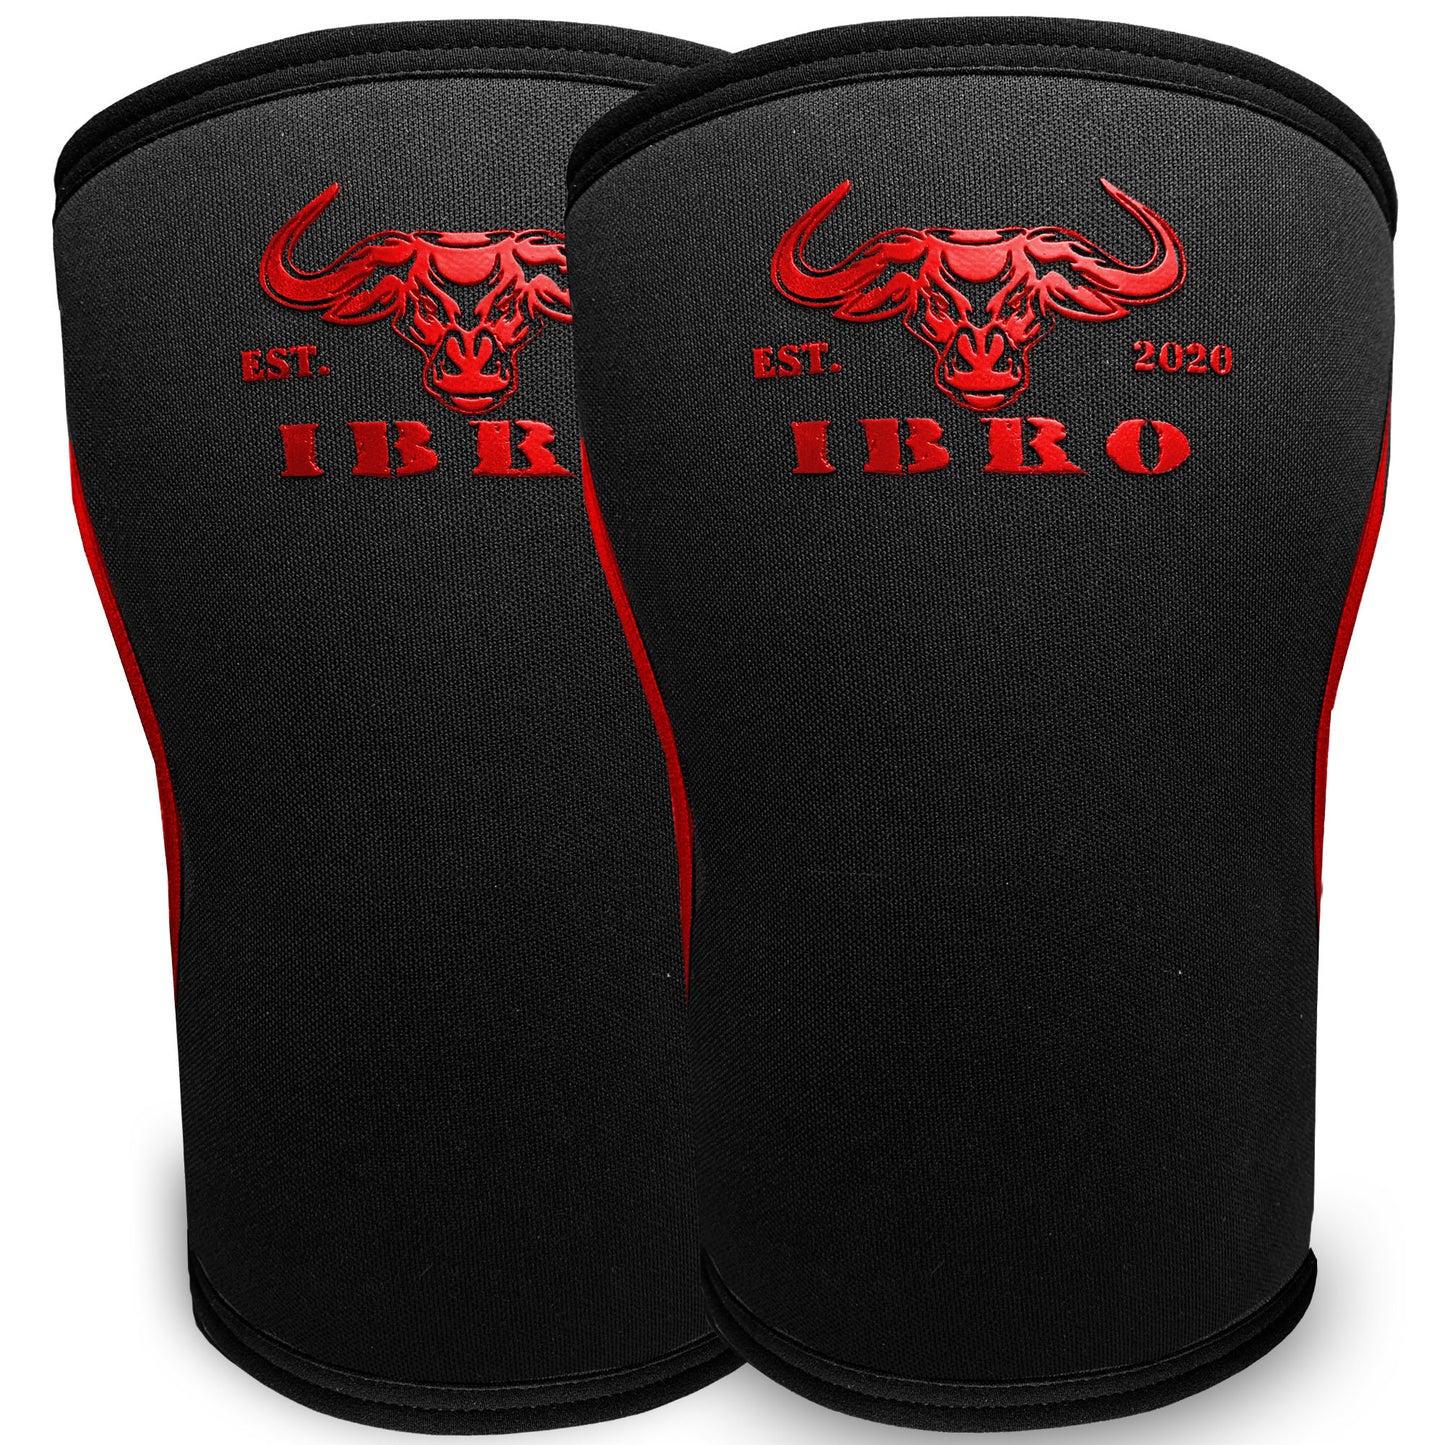 IBRO Premium 7MM Knee Sleeves (Pair) for Weightlifting & Powerlifting, Ultimate Compression Support & Injury Prevention - Squats, Deadlifts - for Men & Women, 1 Year Warranty, BlackRed